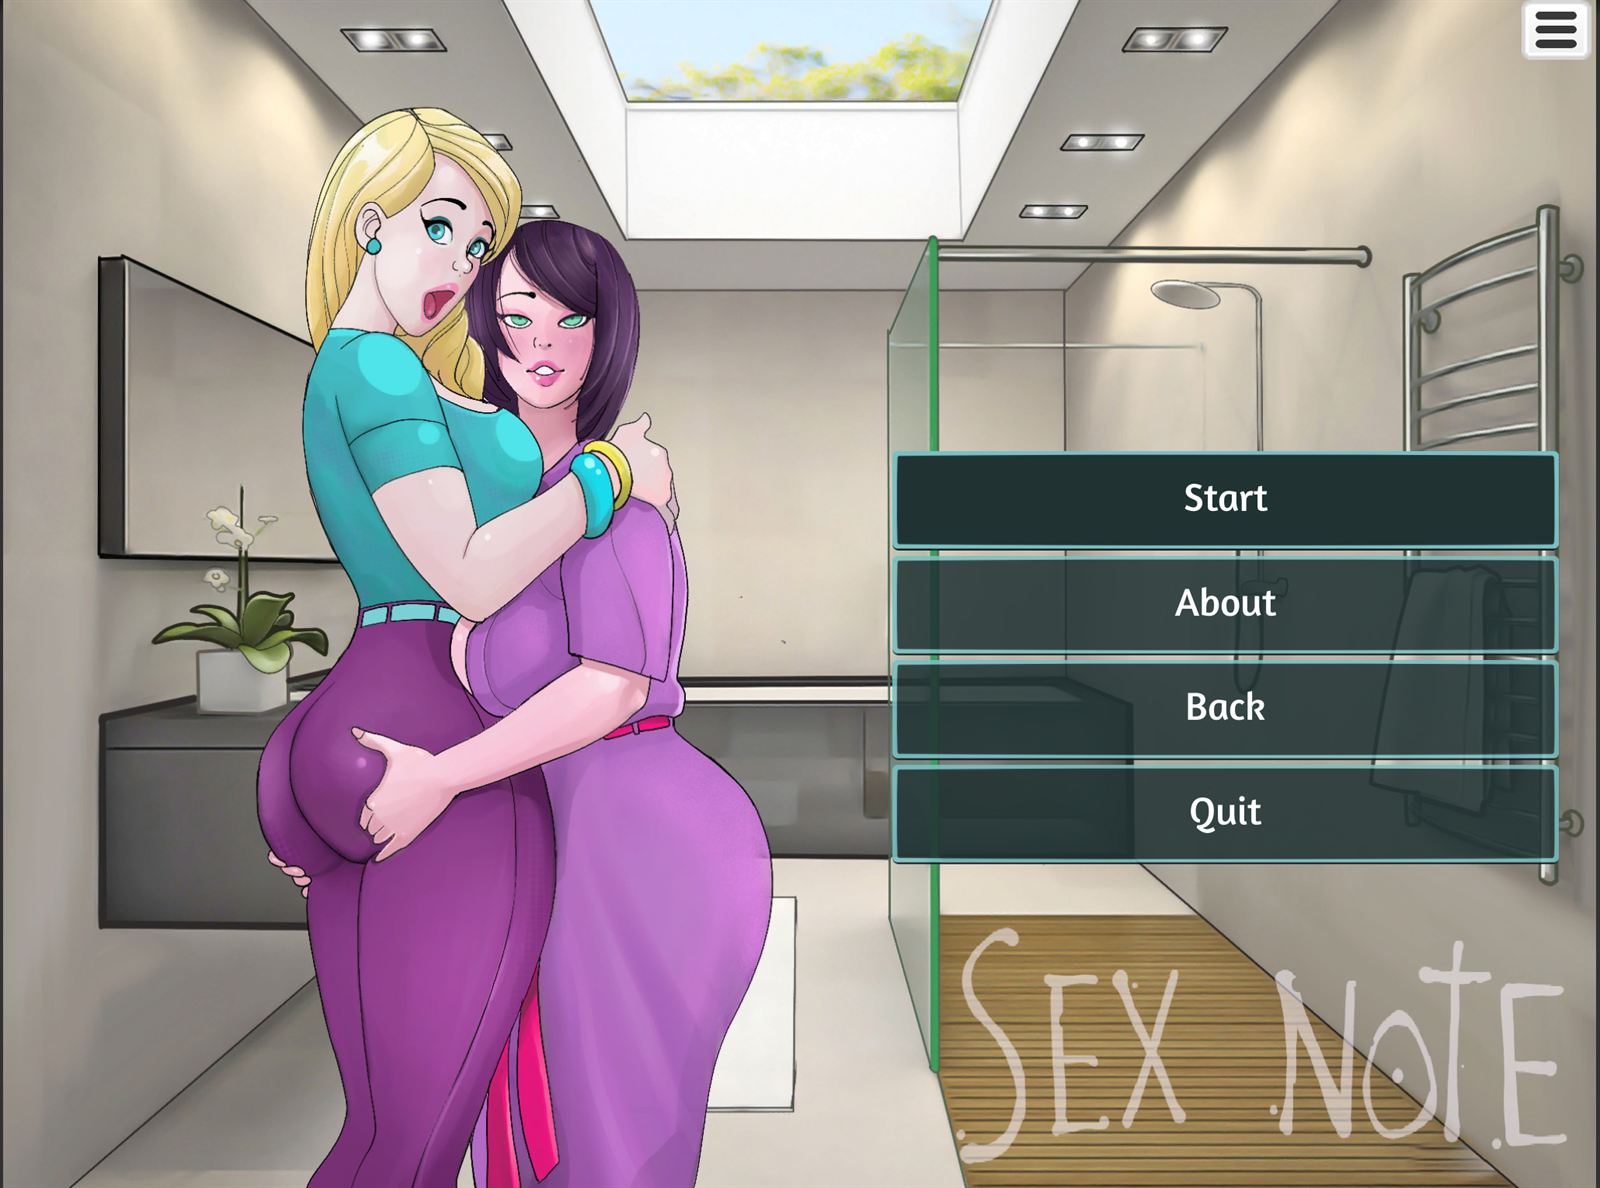 SexNote Adult Game Screenshot (8) .